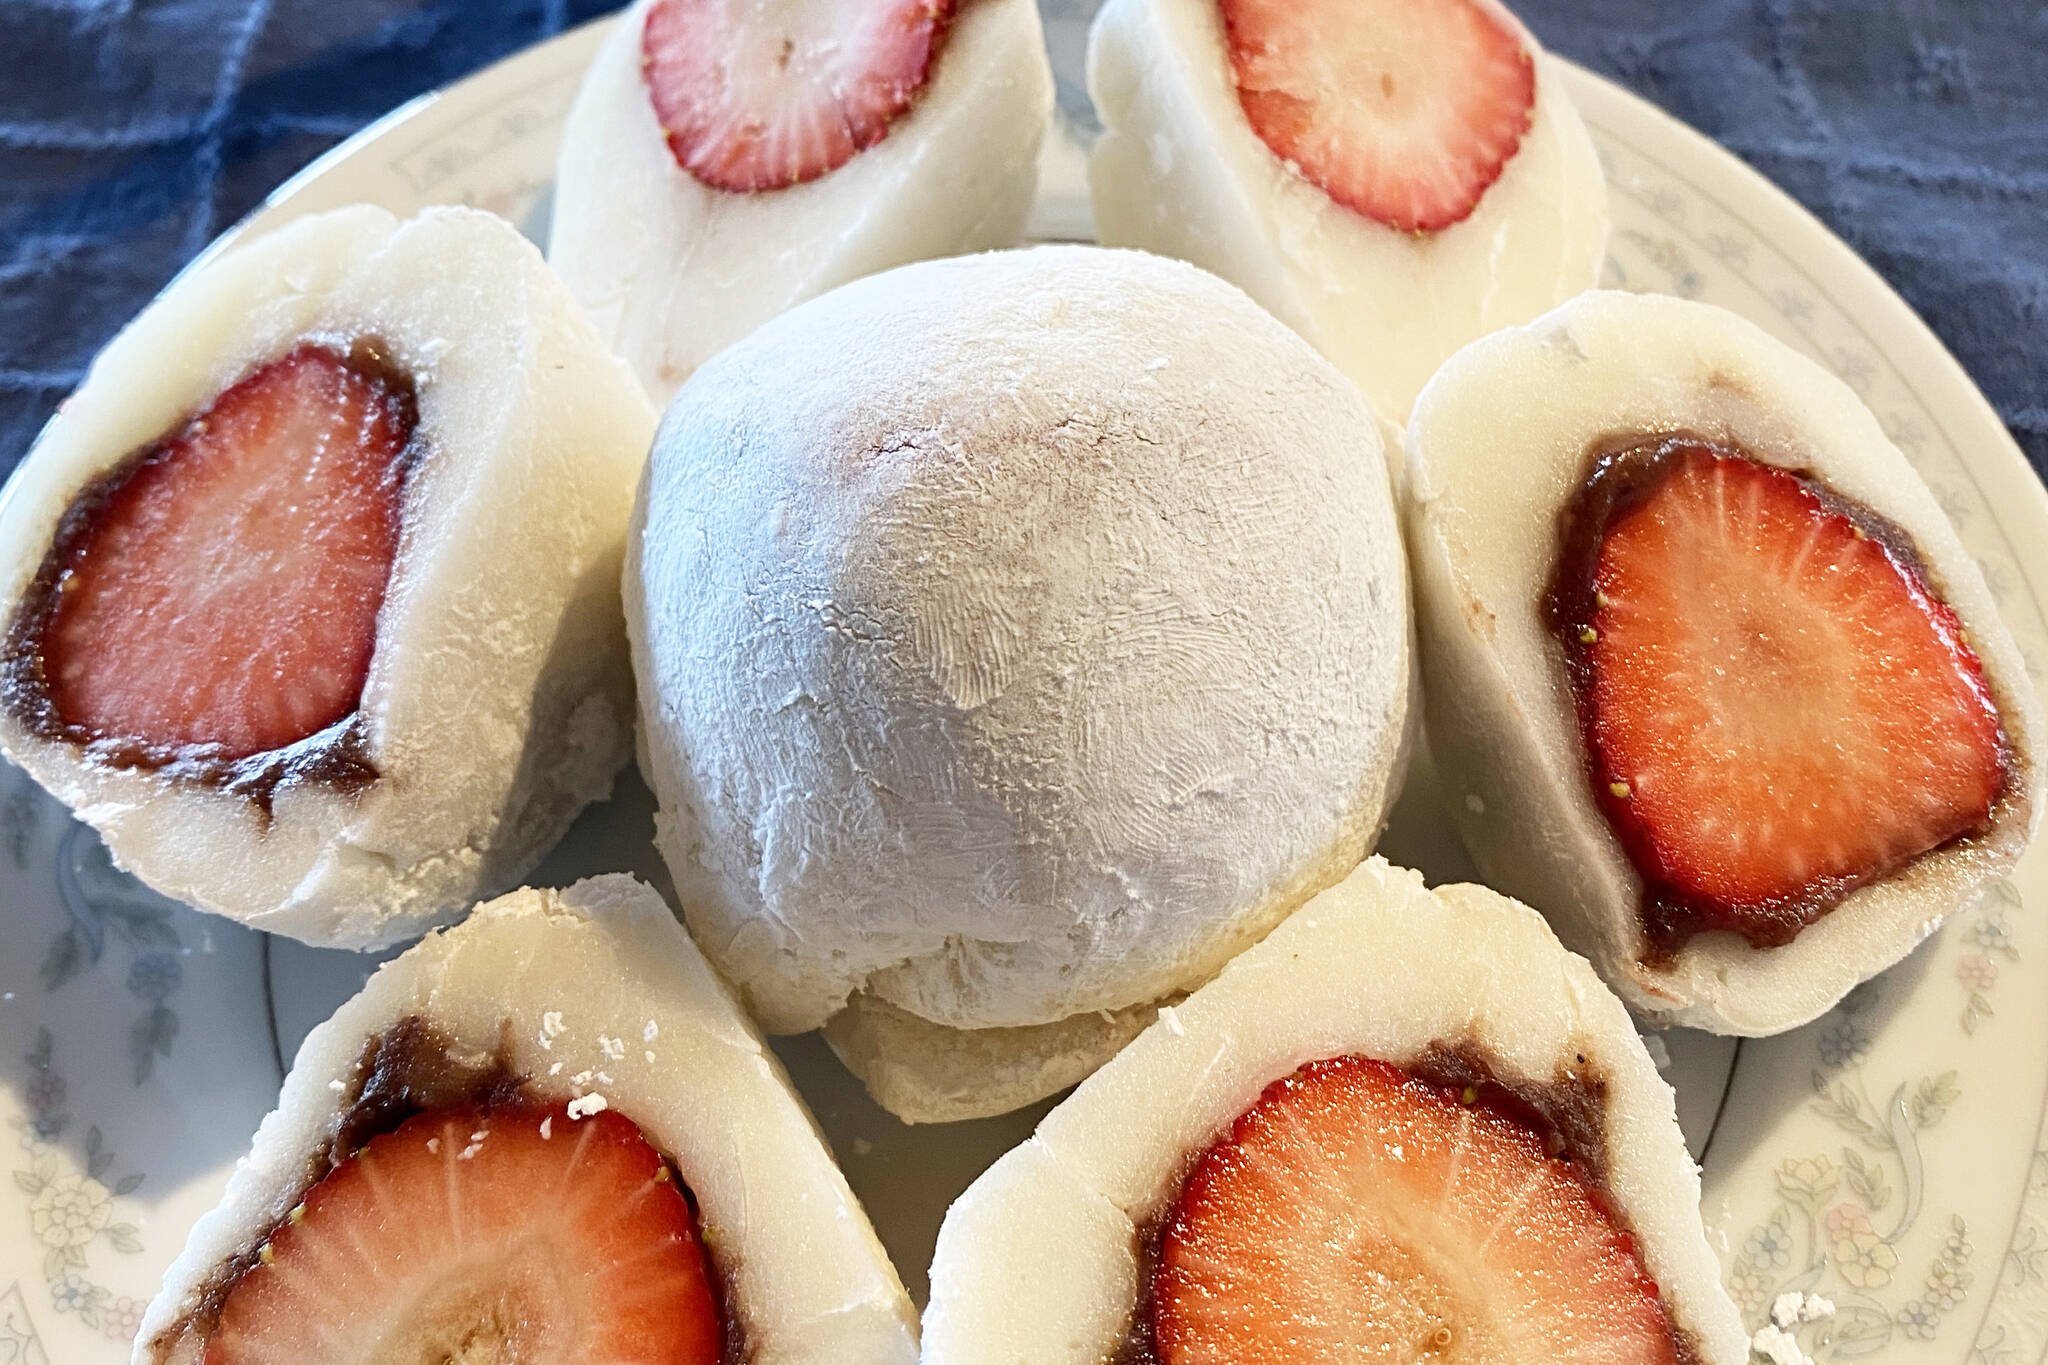 Strawberries and red bean paste fill these delicate mochi desserts. (Photo by Tressa Dale/Peninsula Clarion)